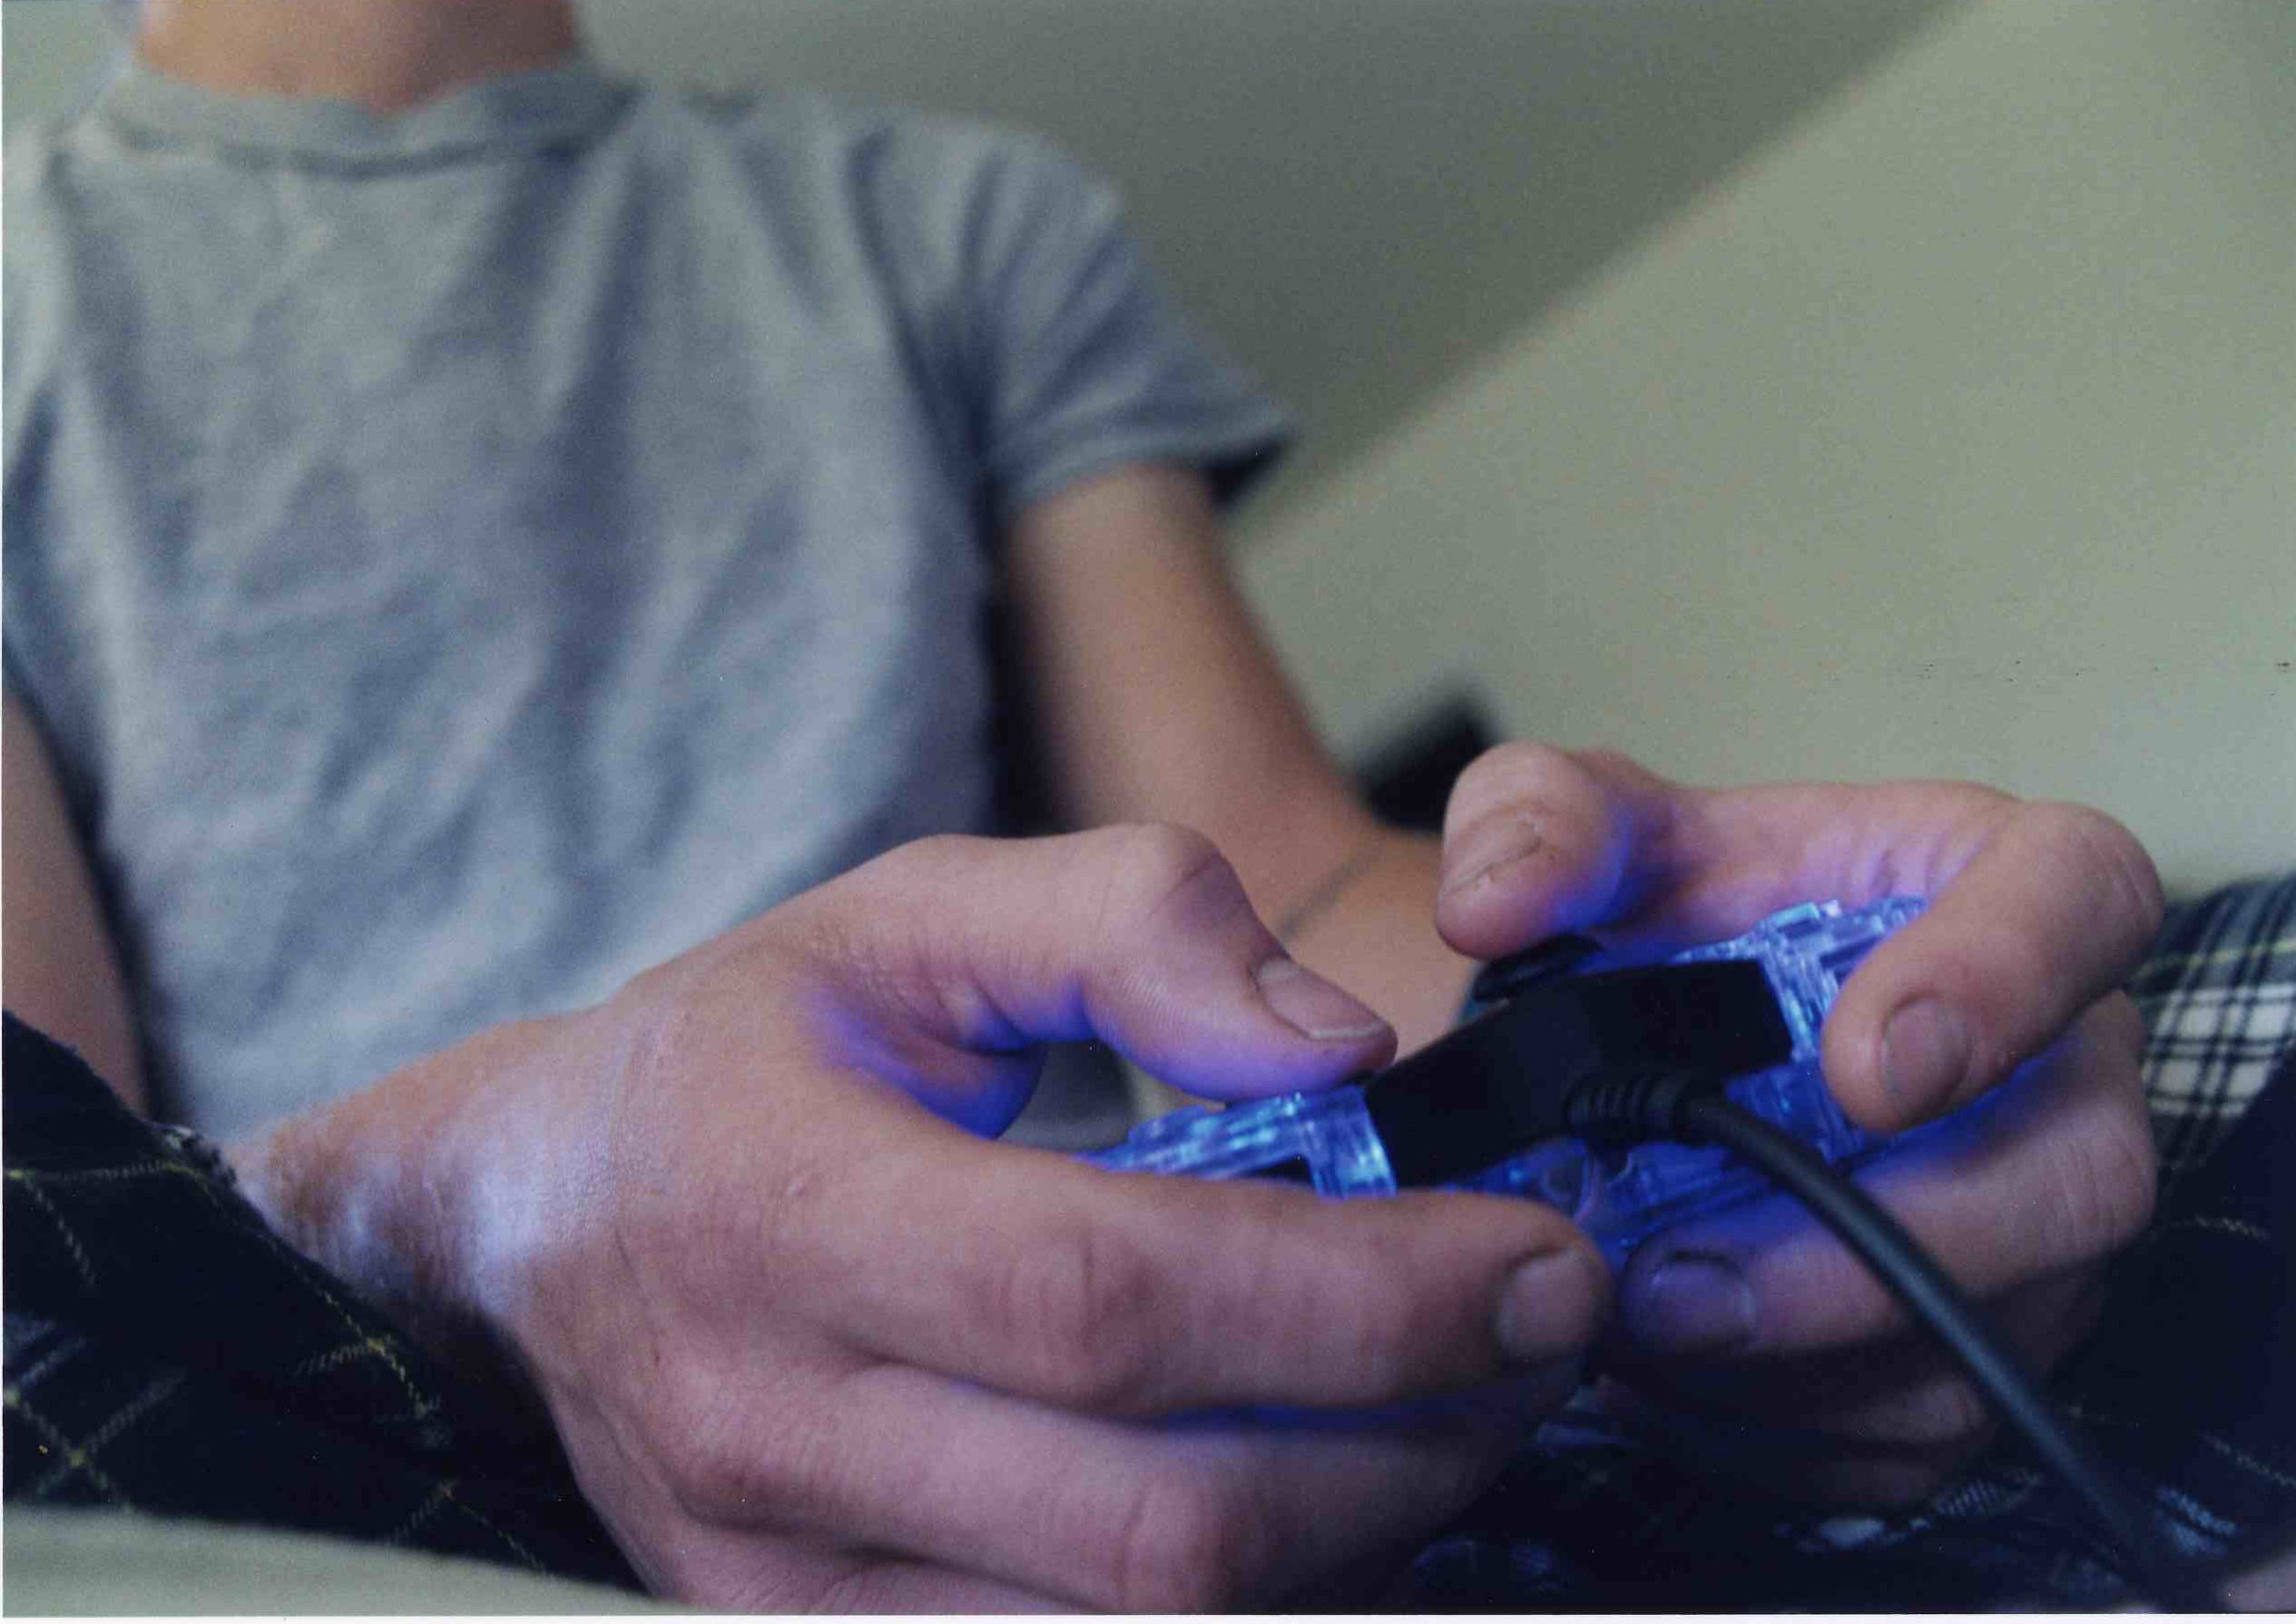 A white male holds a video game controller in his hands